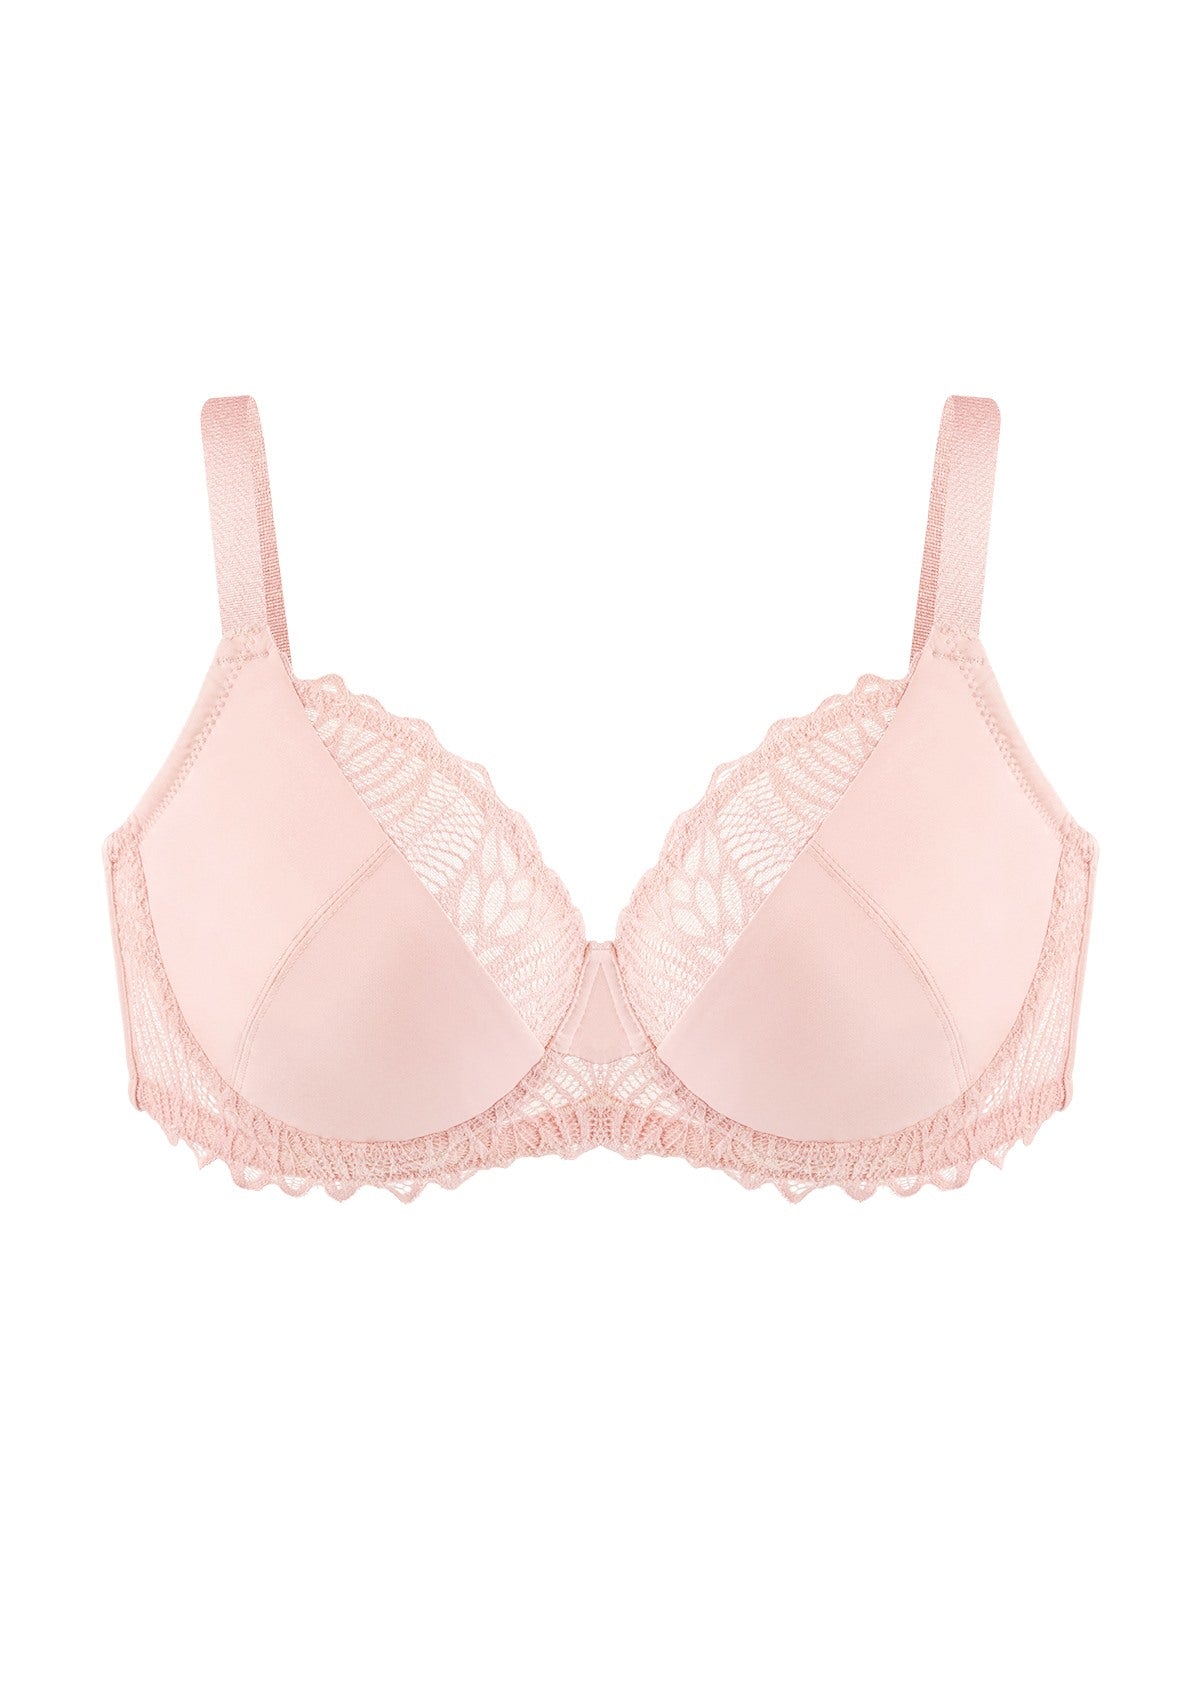 HSIA Pretty Secrets Lace-Trimmed Full Coverage Underwire Bra For Support - Light Pink / 42 / C